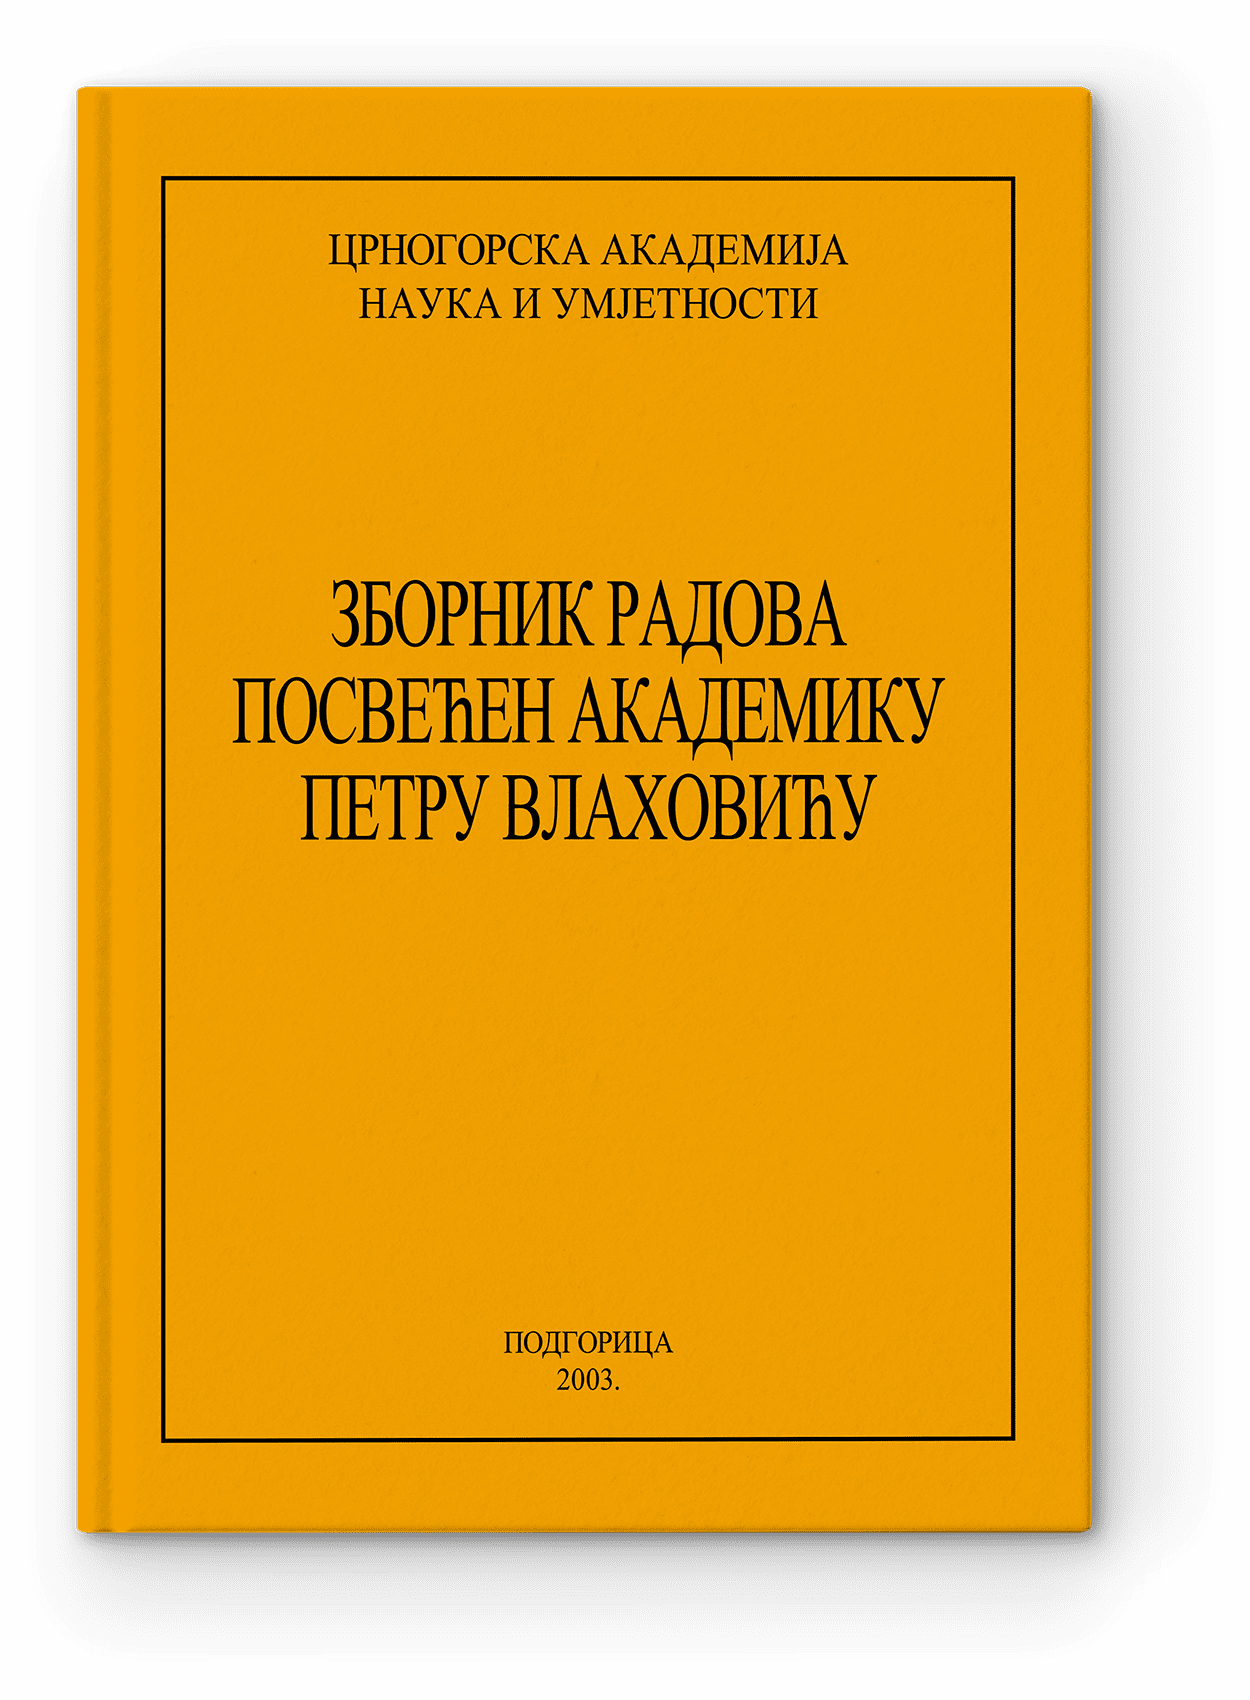 Collection of Scientific Works Dedicated to the Academician Petar Vlahović